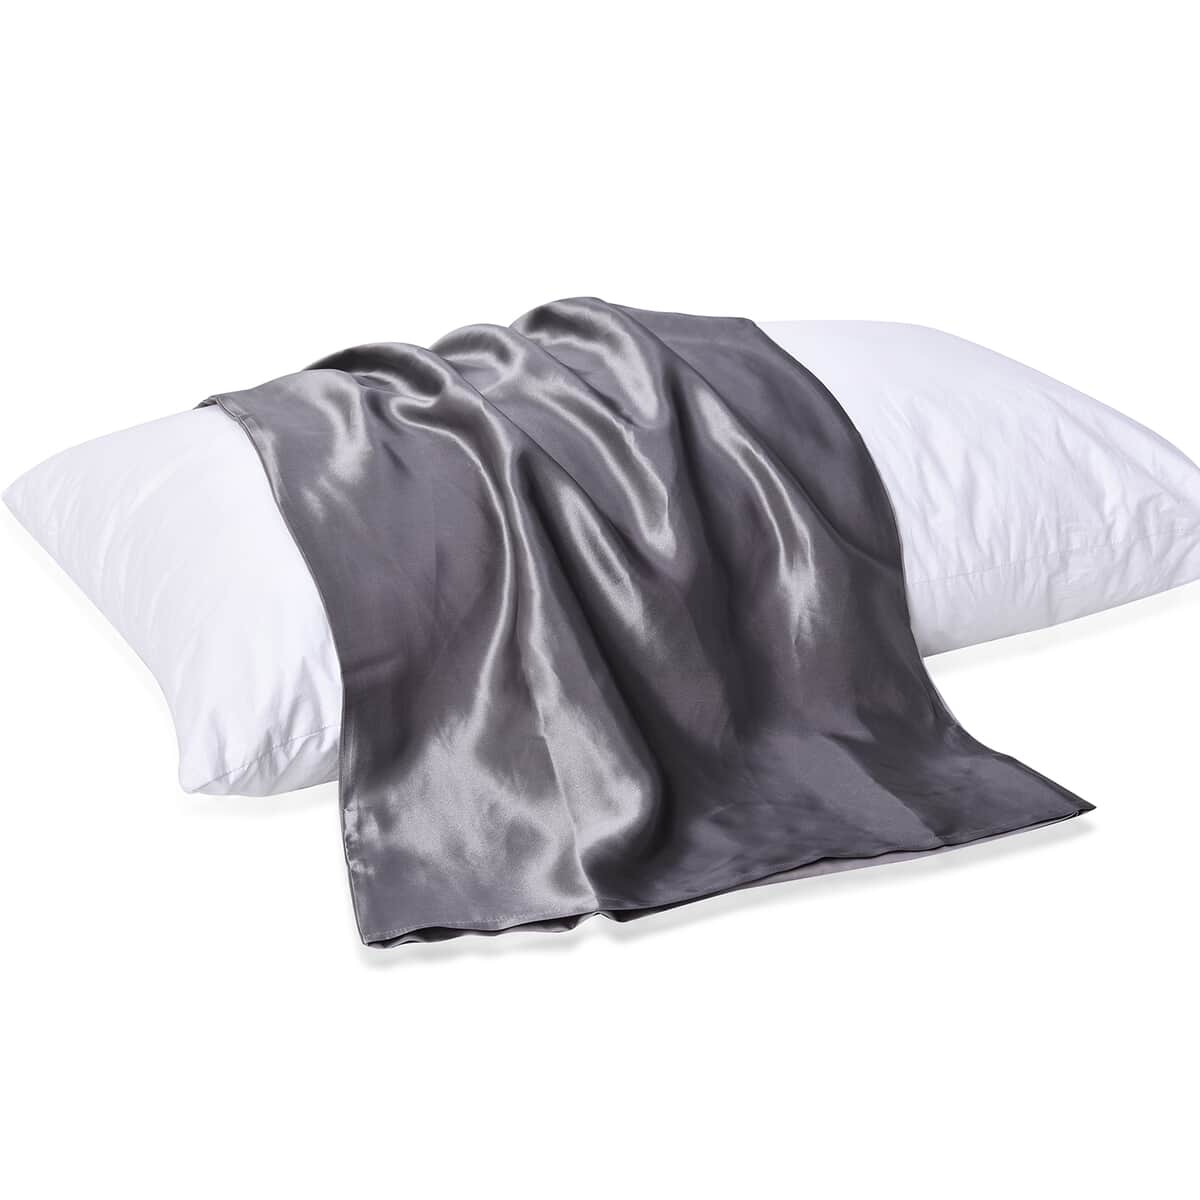 Symphony Home Gray 100% Mulberry Silk Pillowcase Infused with Hyaluronic Acid & Argan Oil - King, Pillow Protectors, Pillow Cover, Cushion Cover, Pillow Shams, Pillow Case Covers image number 4